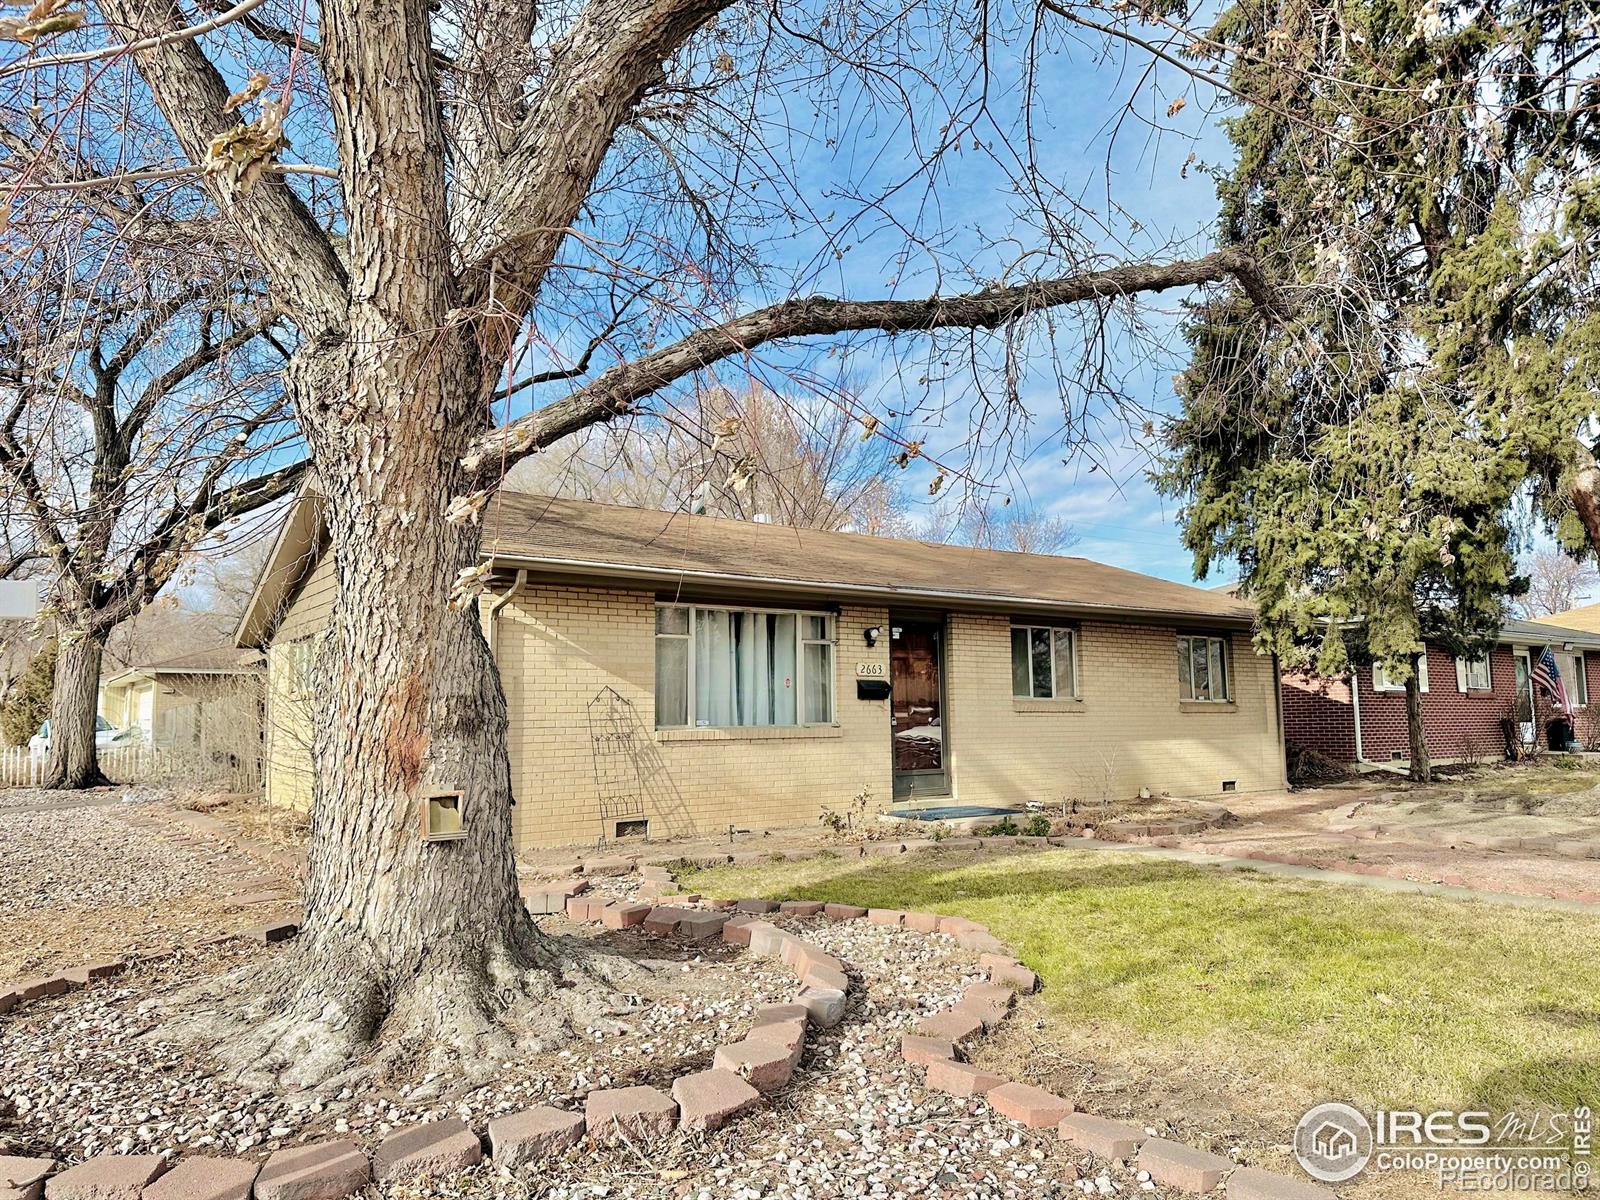 2663  12th Avenue, greeley MLS: 4567891000753 Beds: 3 Baths: 1 Price: $324,000